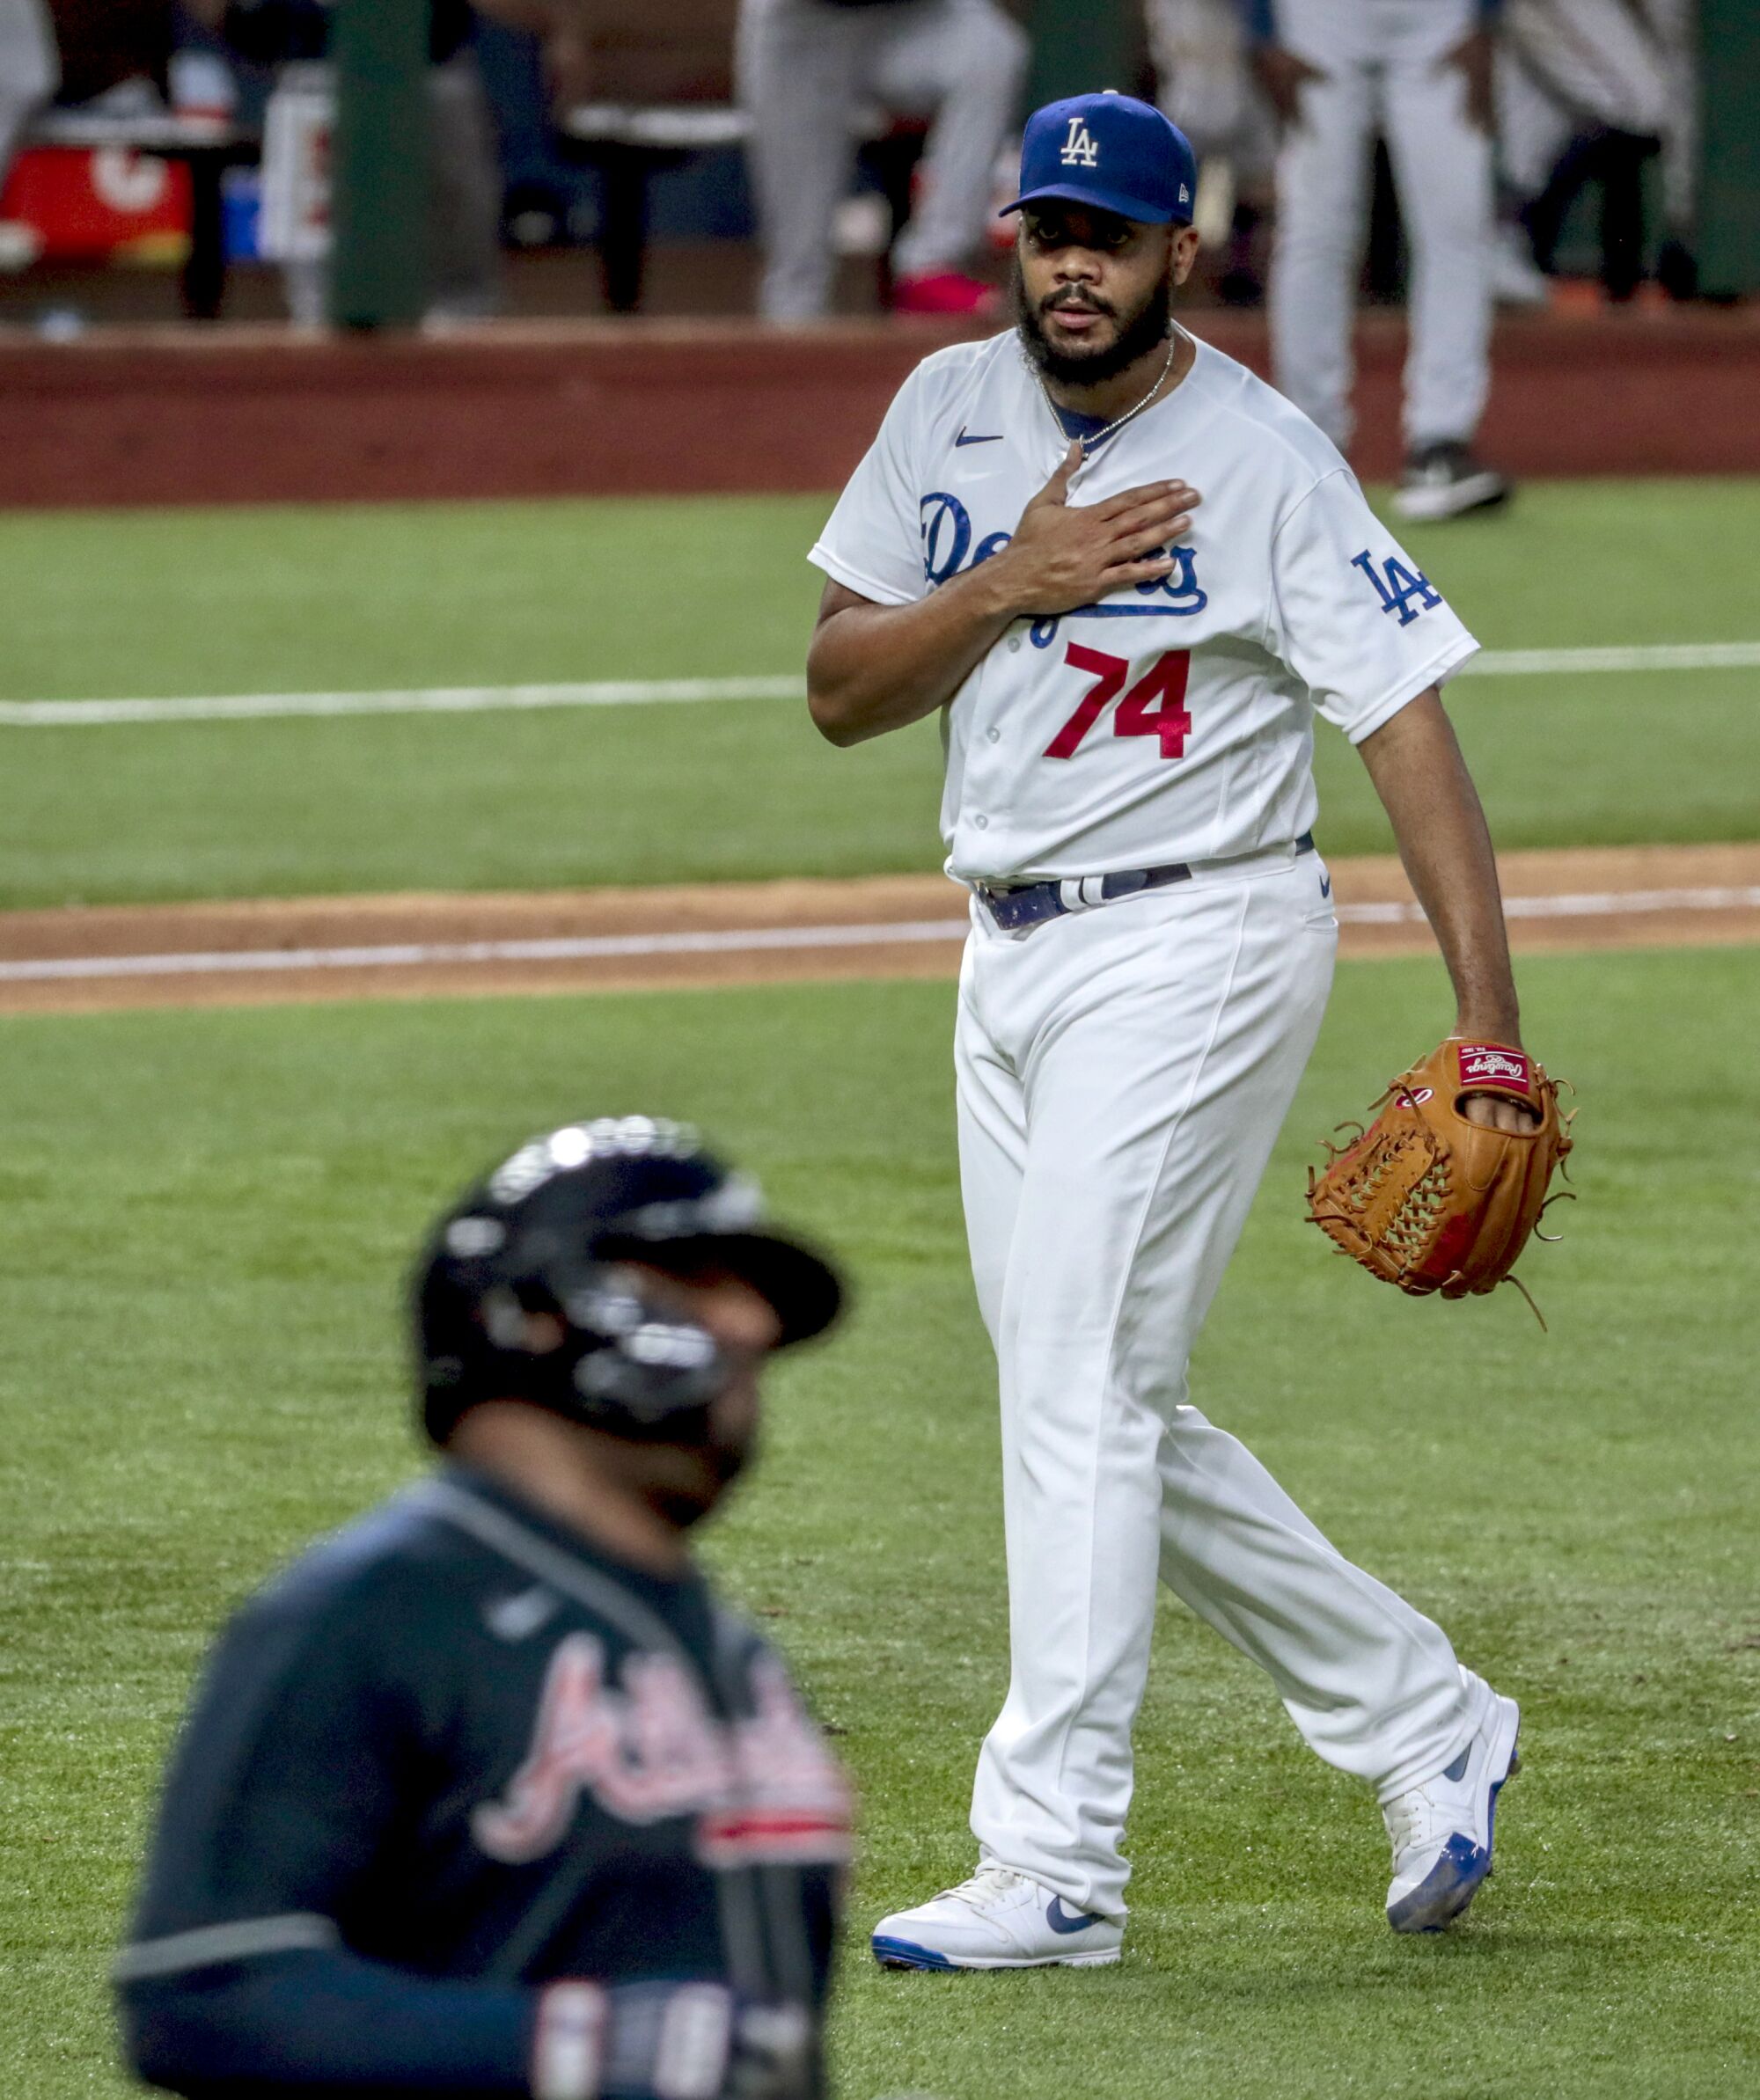  Dodgers relief pitcher Kenley Jansen taps his chest after retiring Pablo Sandoval to save a 3-1 win.